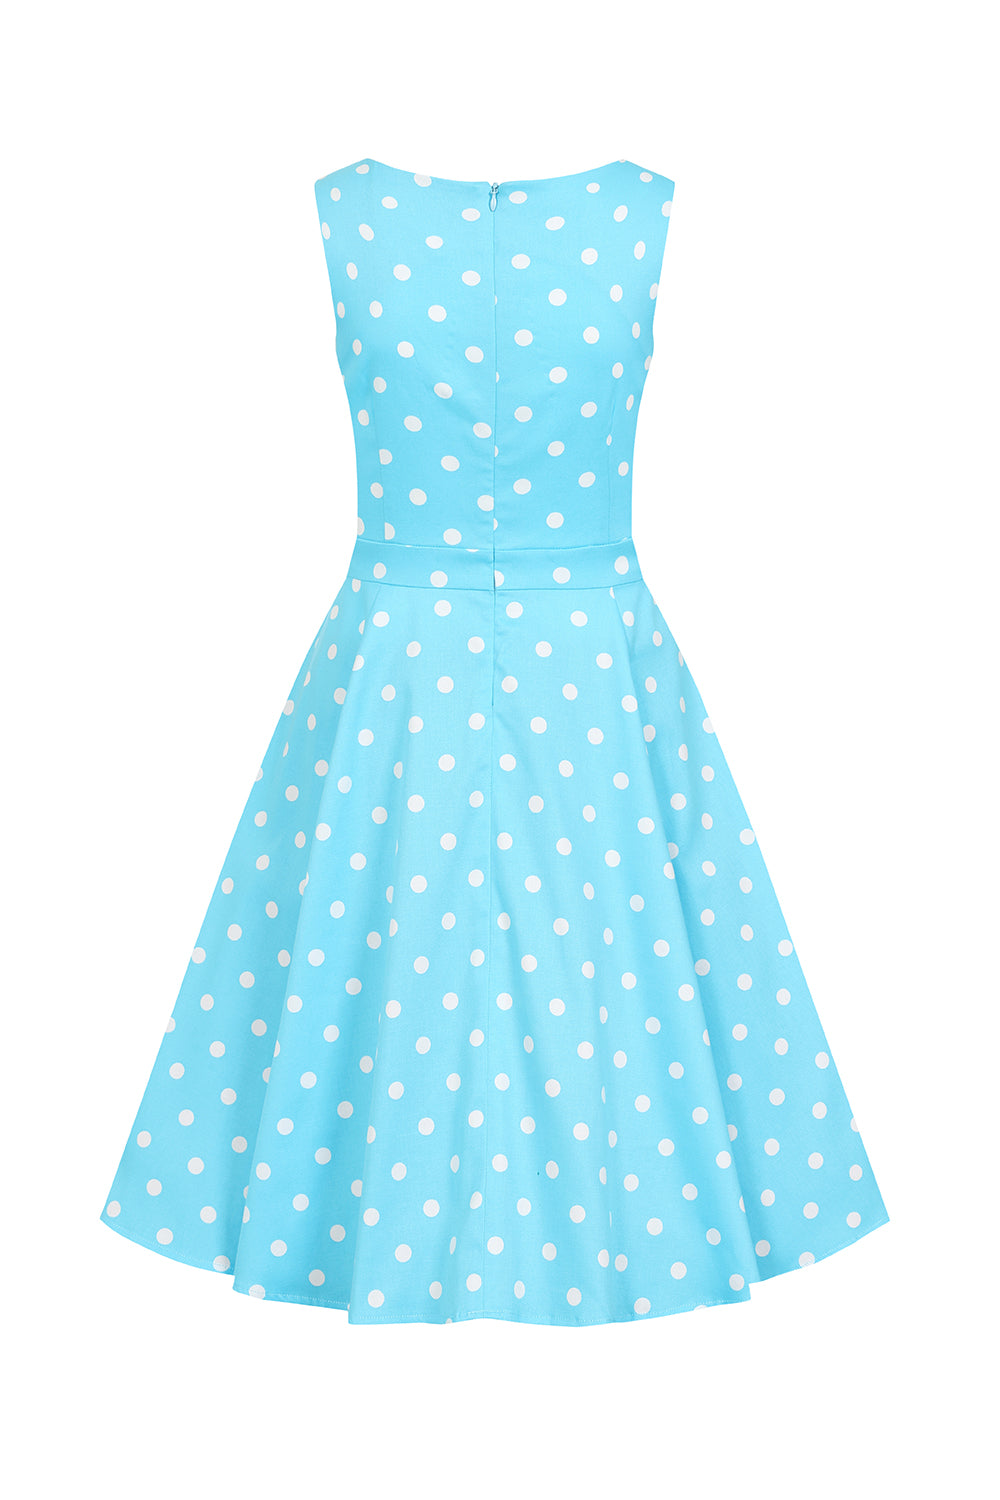 Girls Ruth Polka Dot Swing Dress by Hearts and Roses